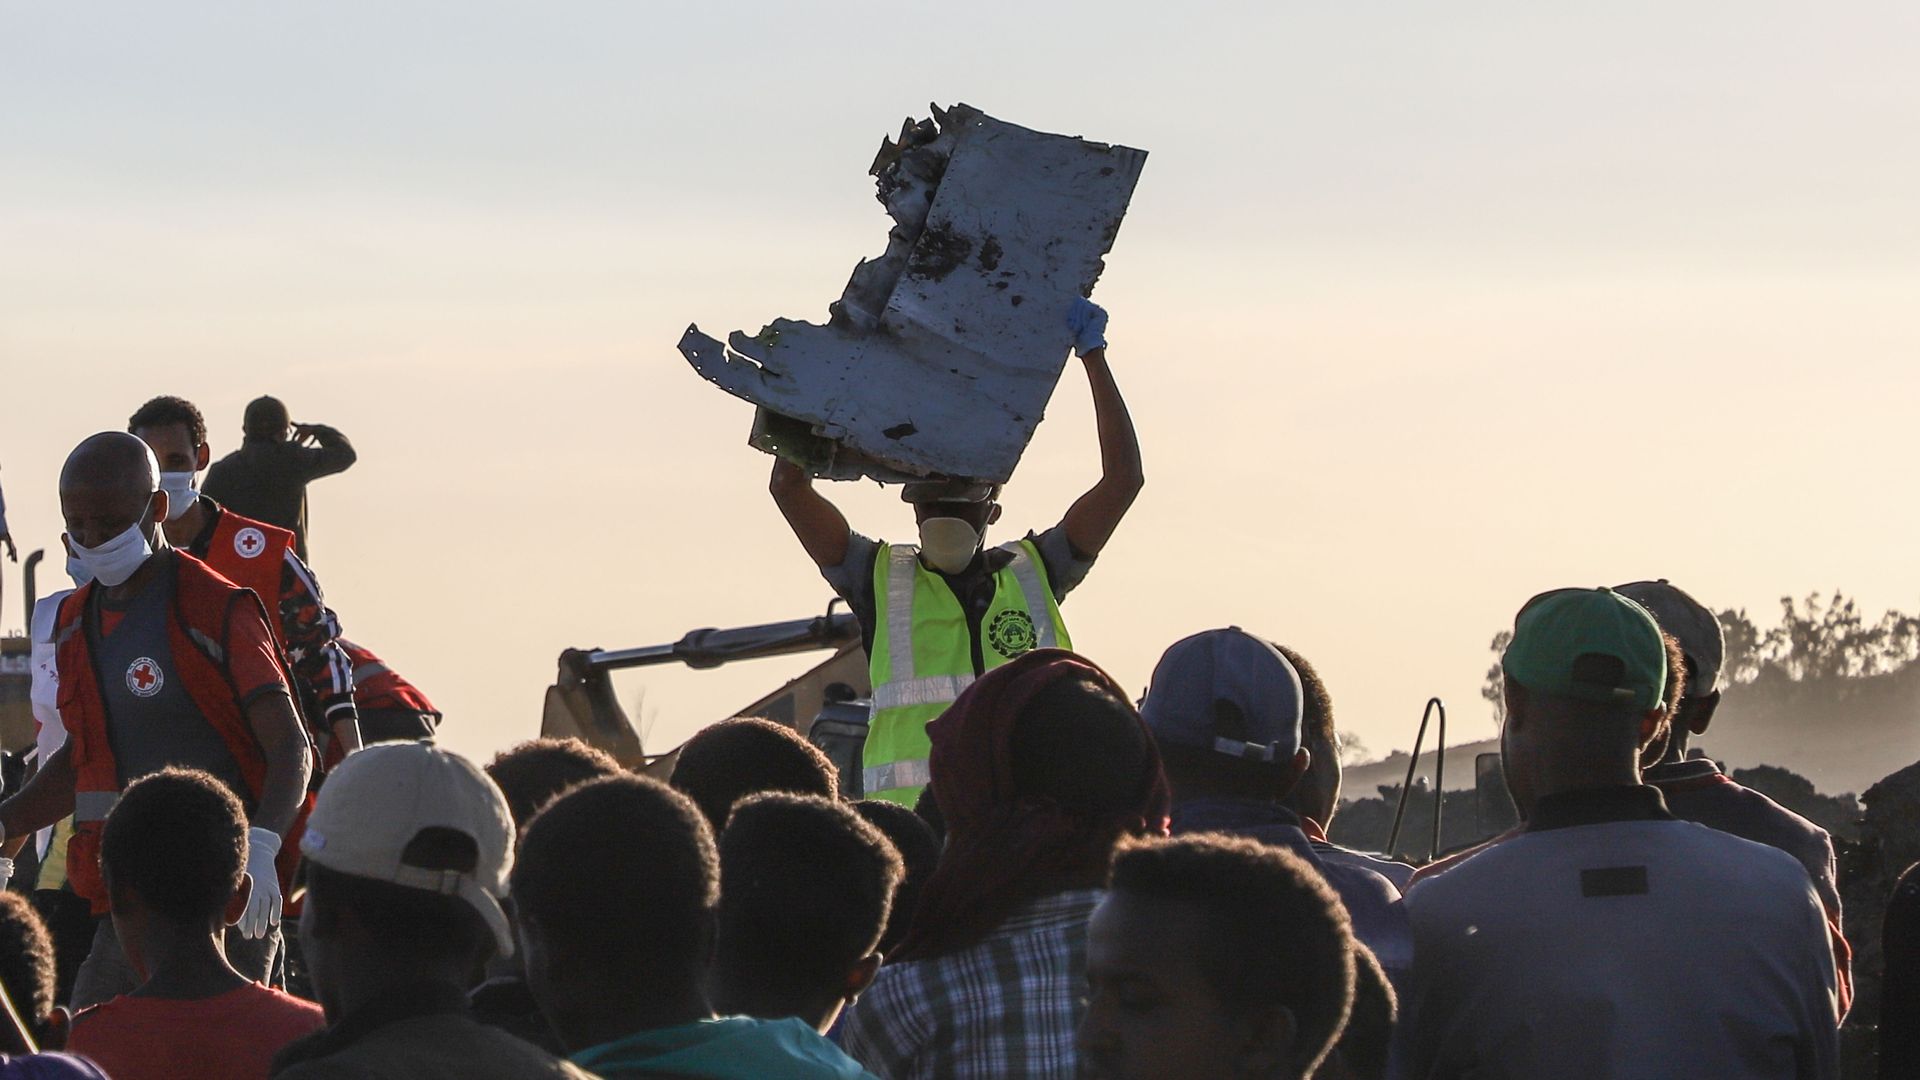  A man carries a piece of debris on his head at the crash site of a Nairobi-bound Ethiopian Airlines flight near Bishoftu